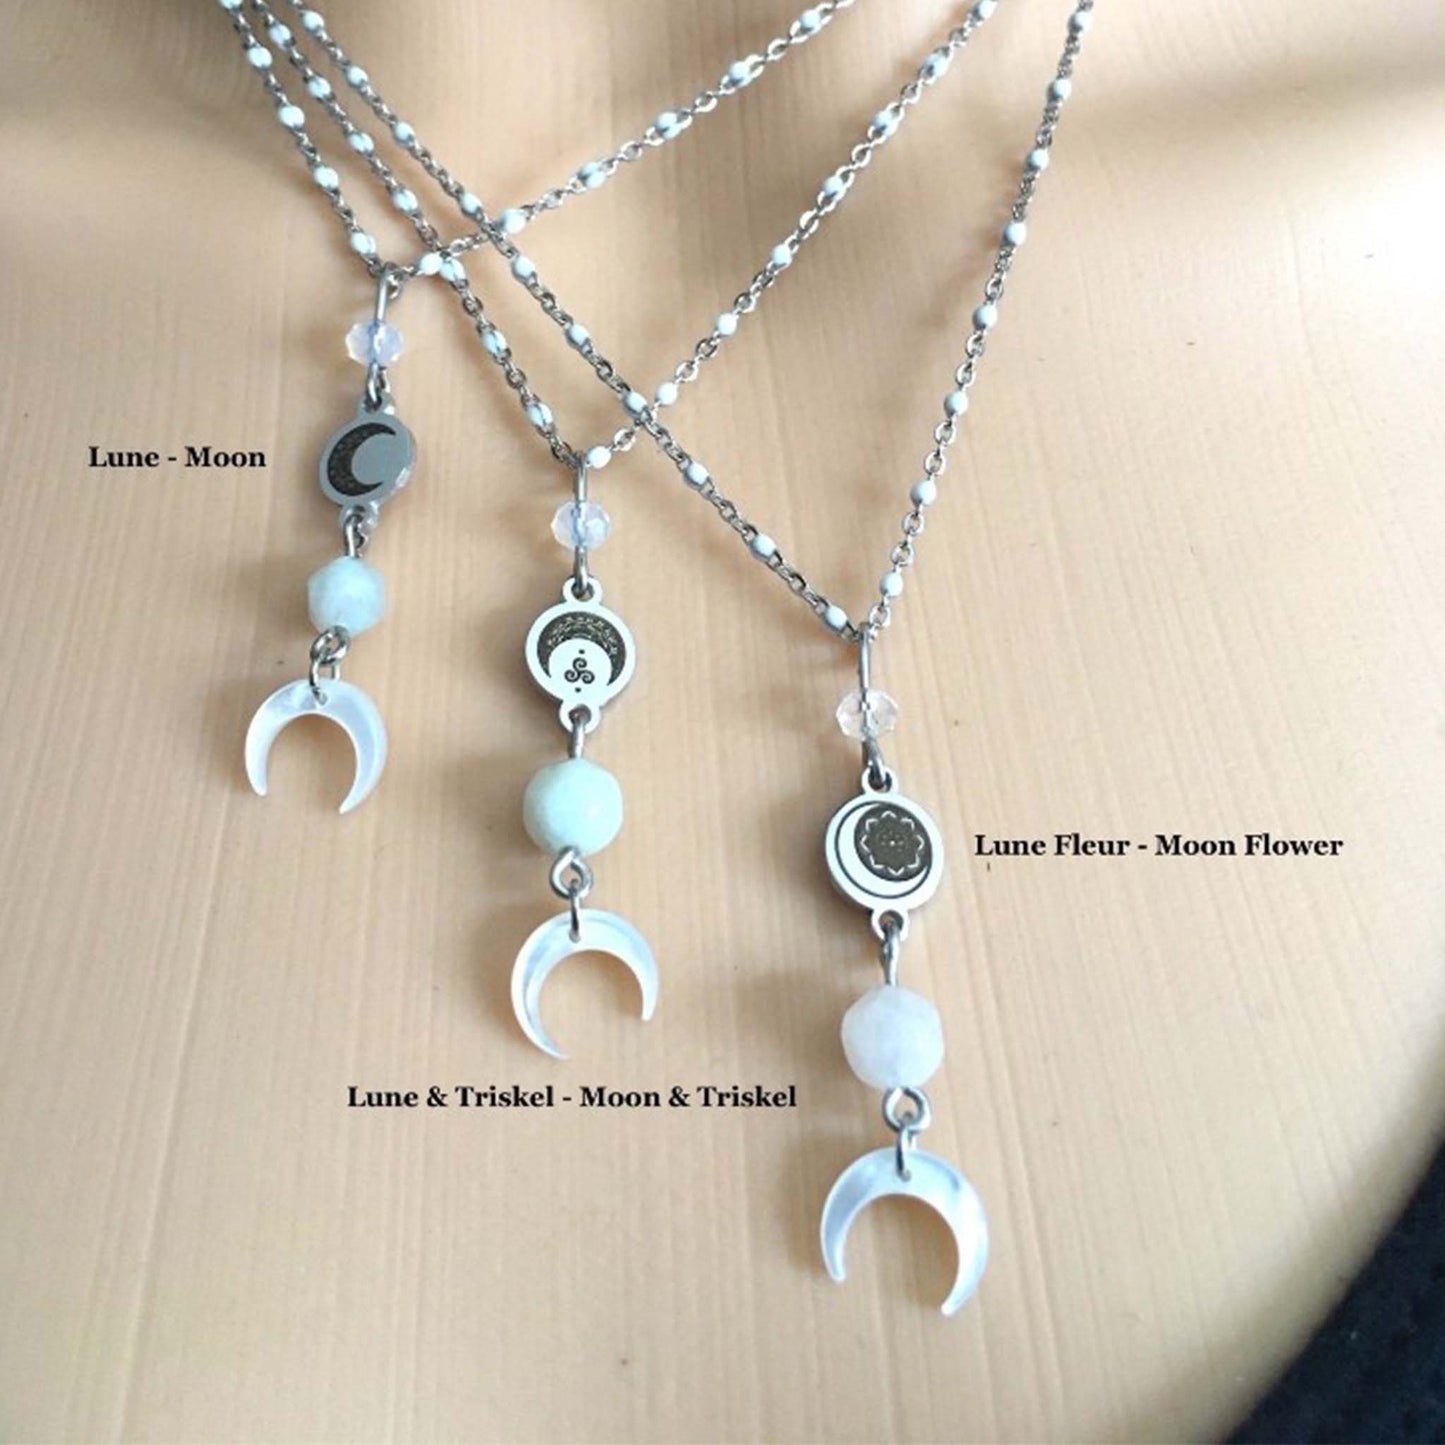 Necklaces - Talisman Rosary- Choose your symbol